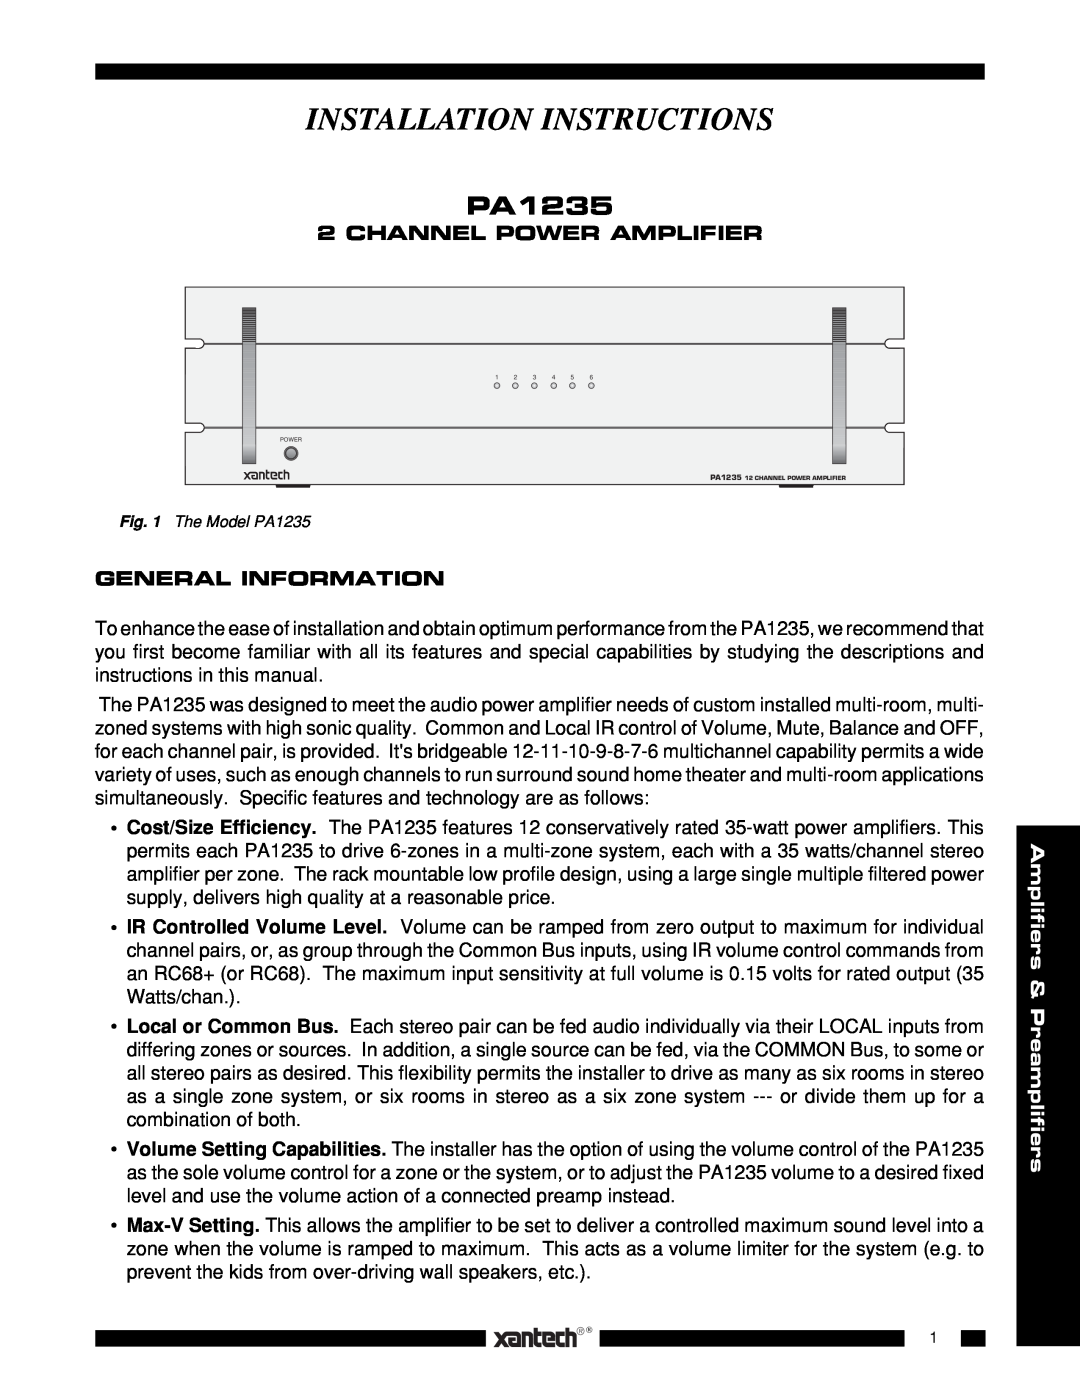 Xantech PA1235 installation instructions Channel Power Amplifier, General Information, Installation Instructions 